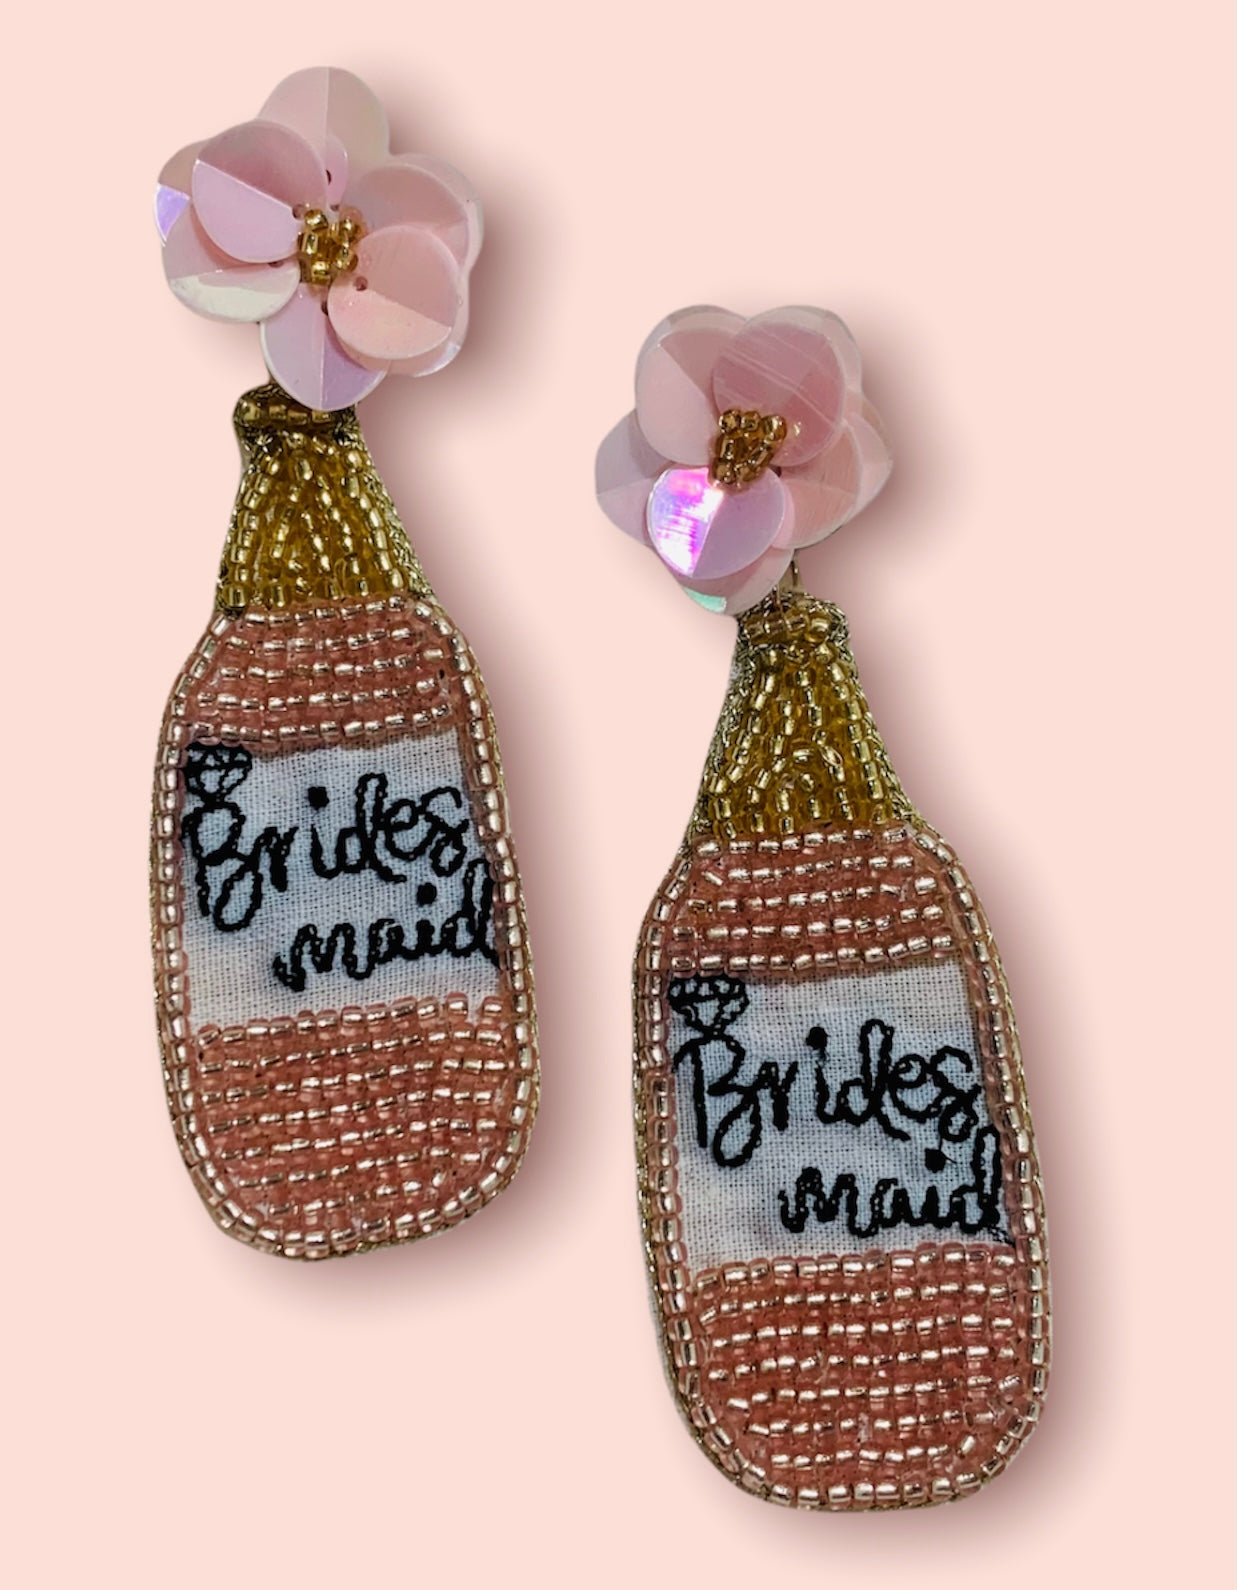 Bridesmaid Pink Champagne Bottle Earrings